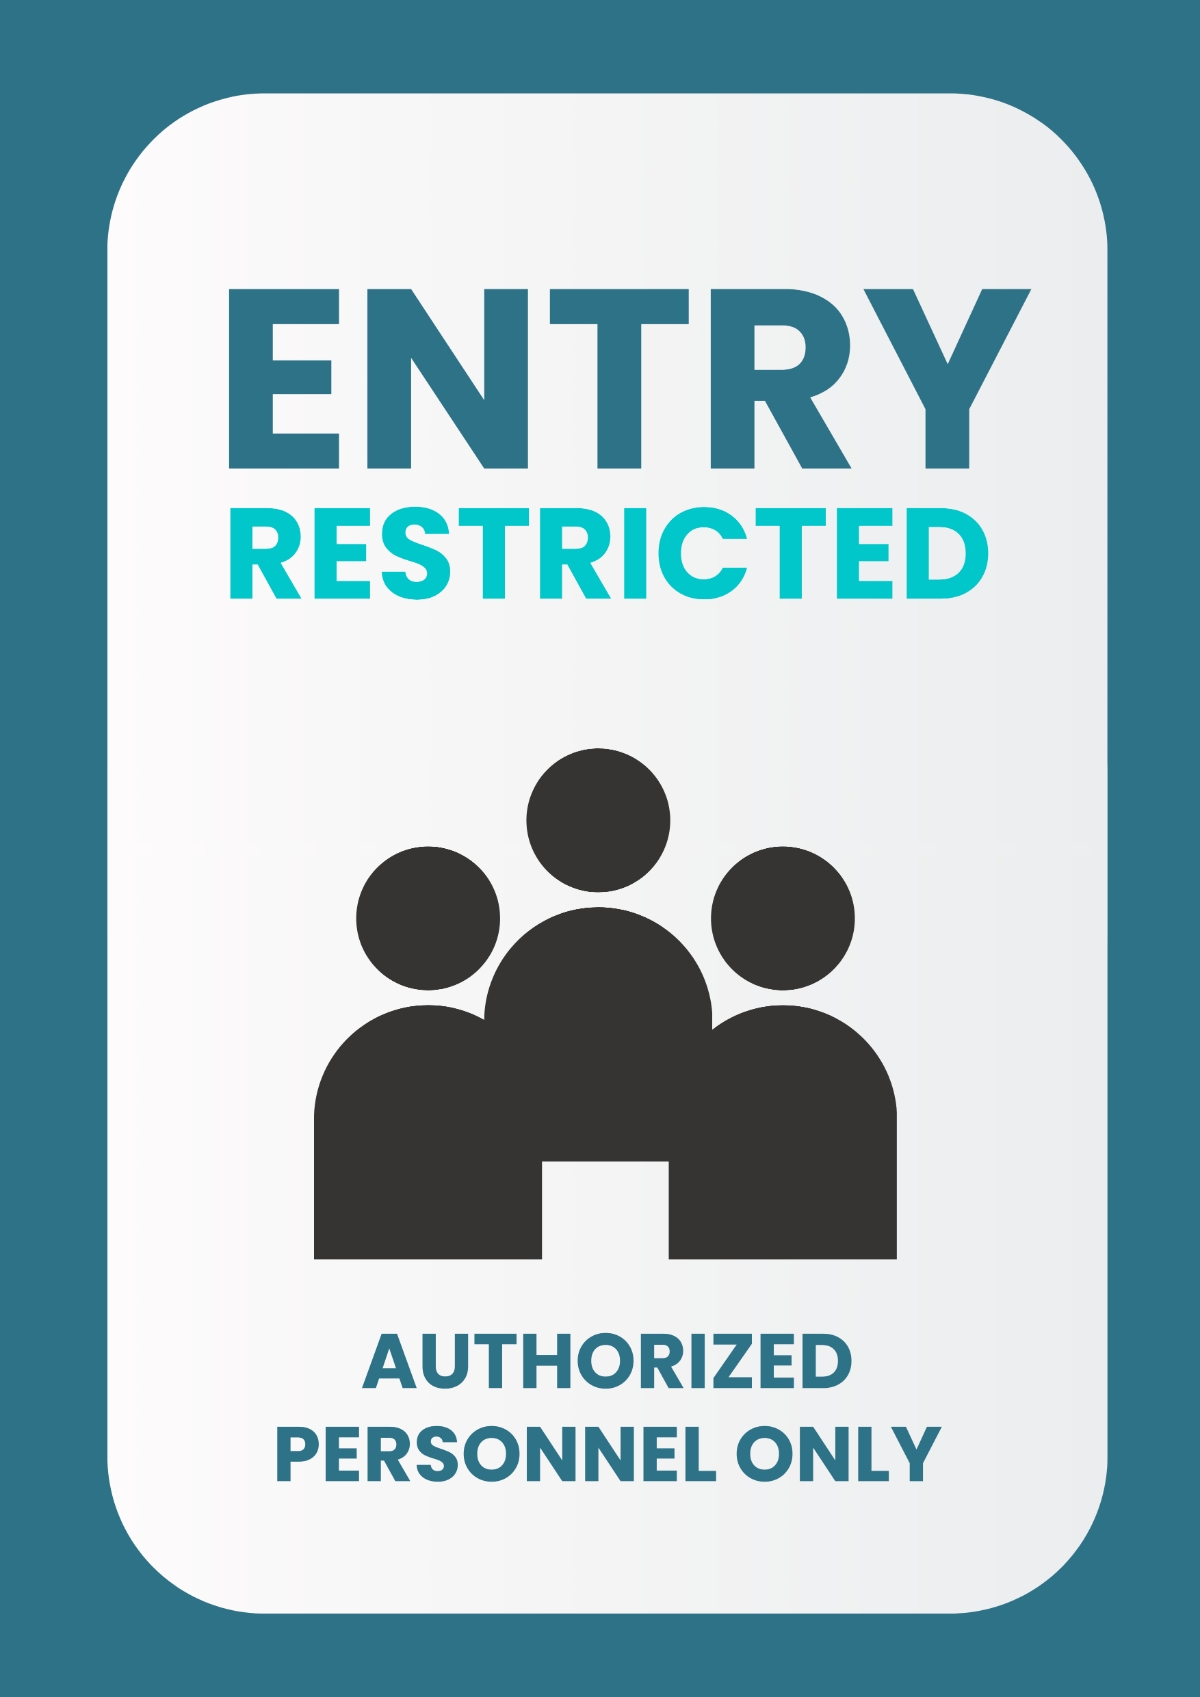 Free Authorized Personnel Only Cleaning Services Area Sign Template